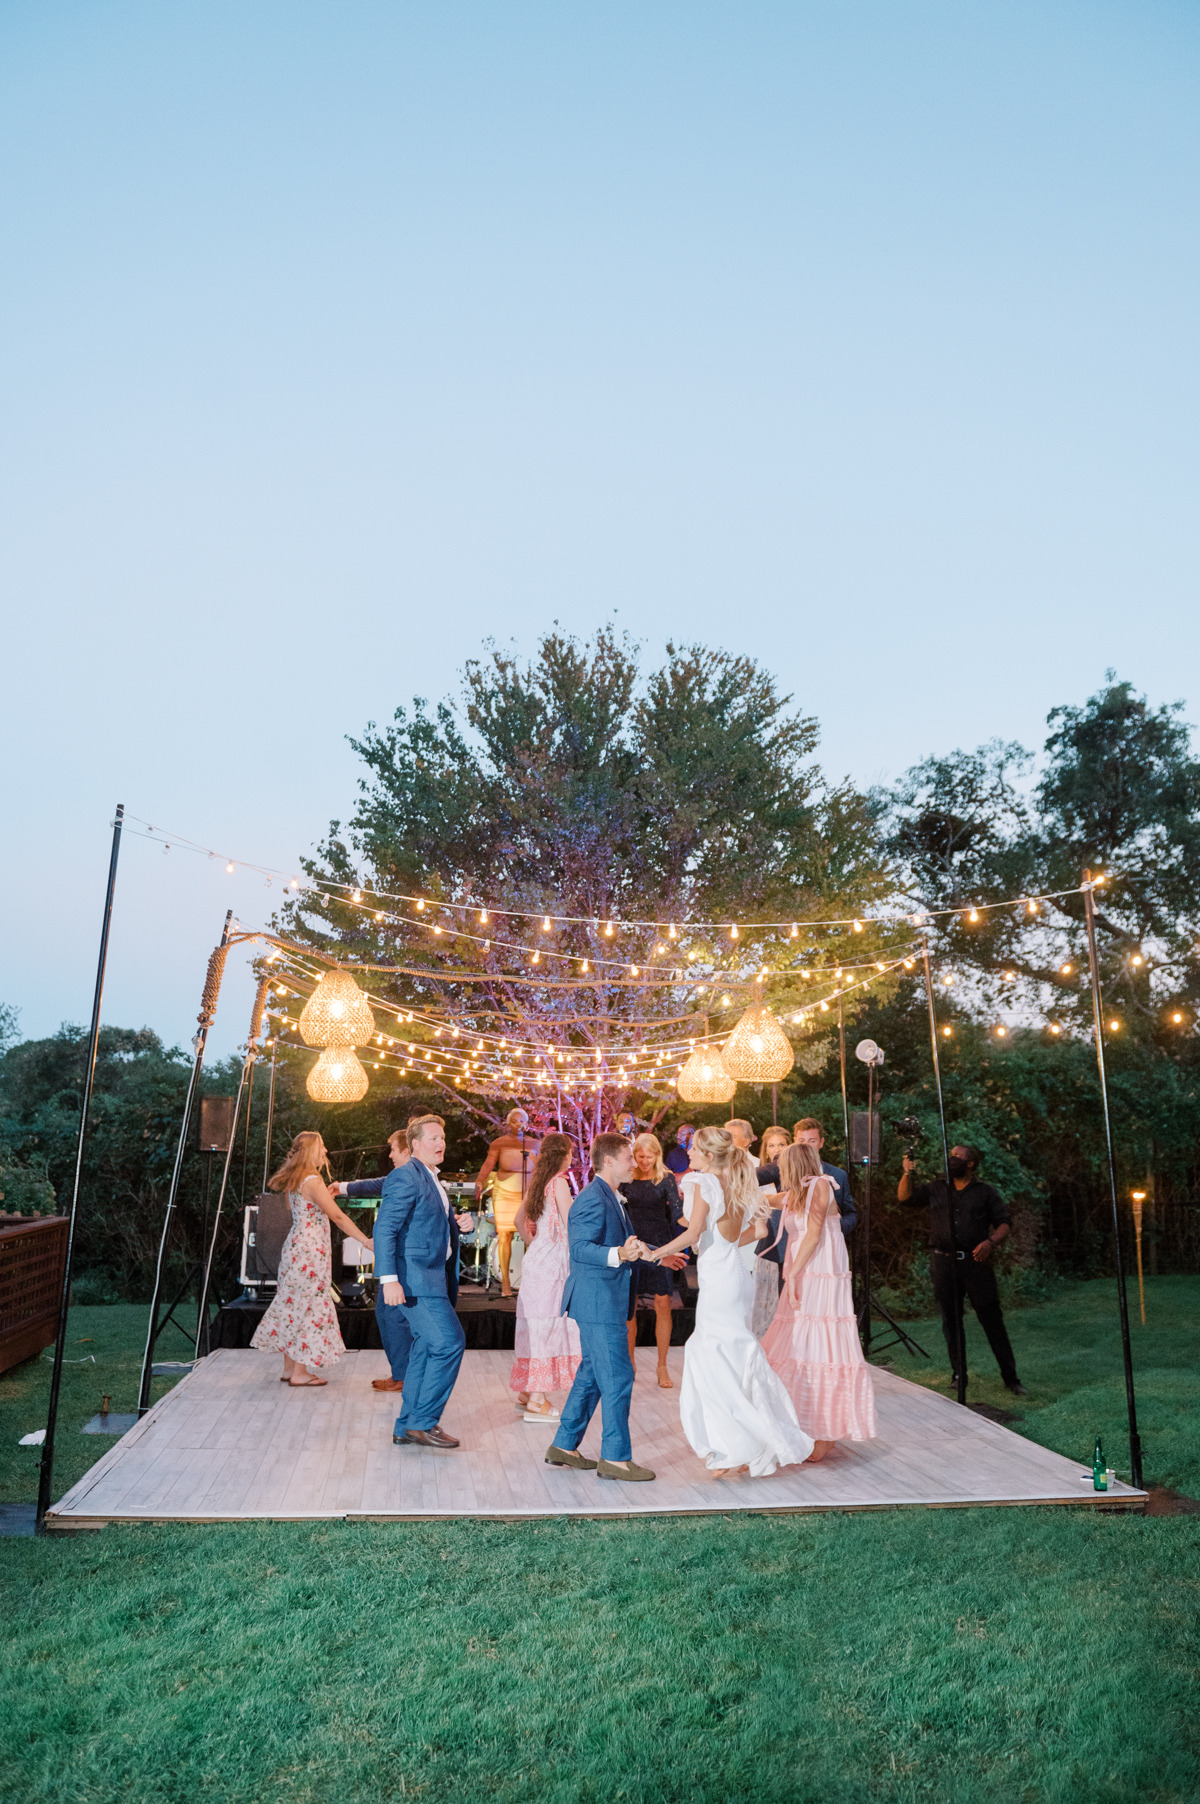 Bride, groom, and guests dancing under string lights and rattan lights